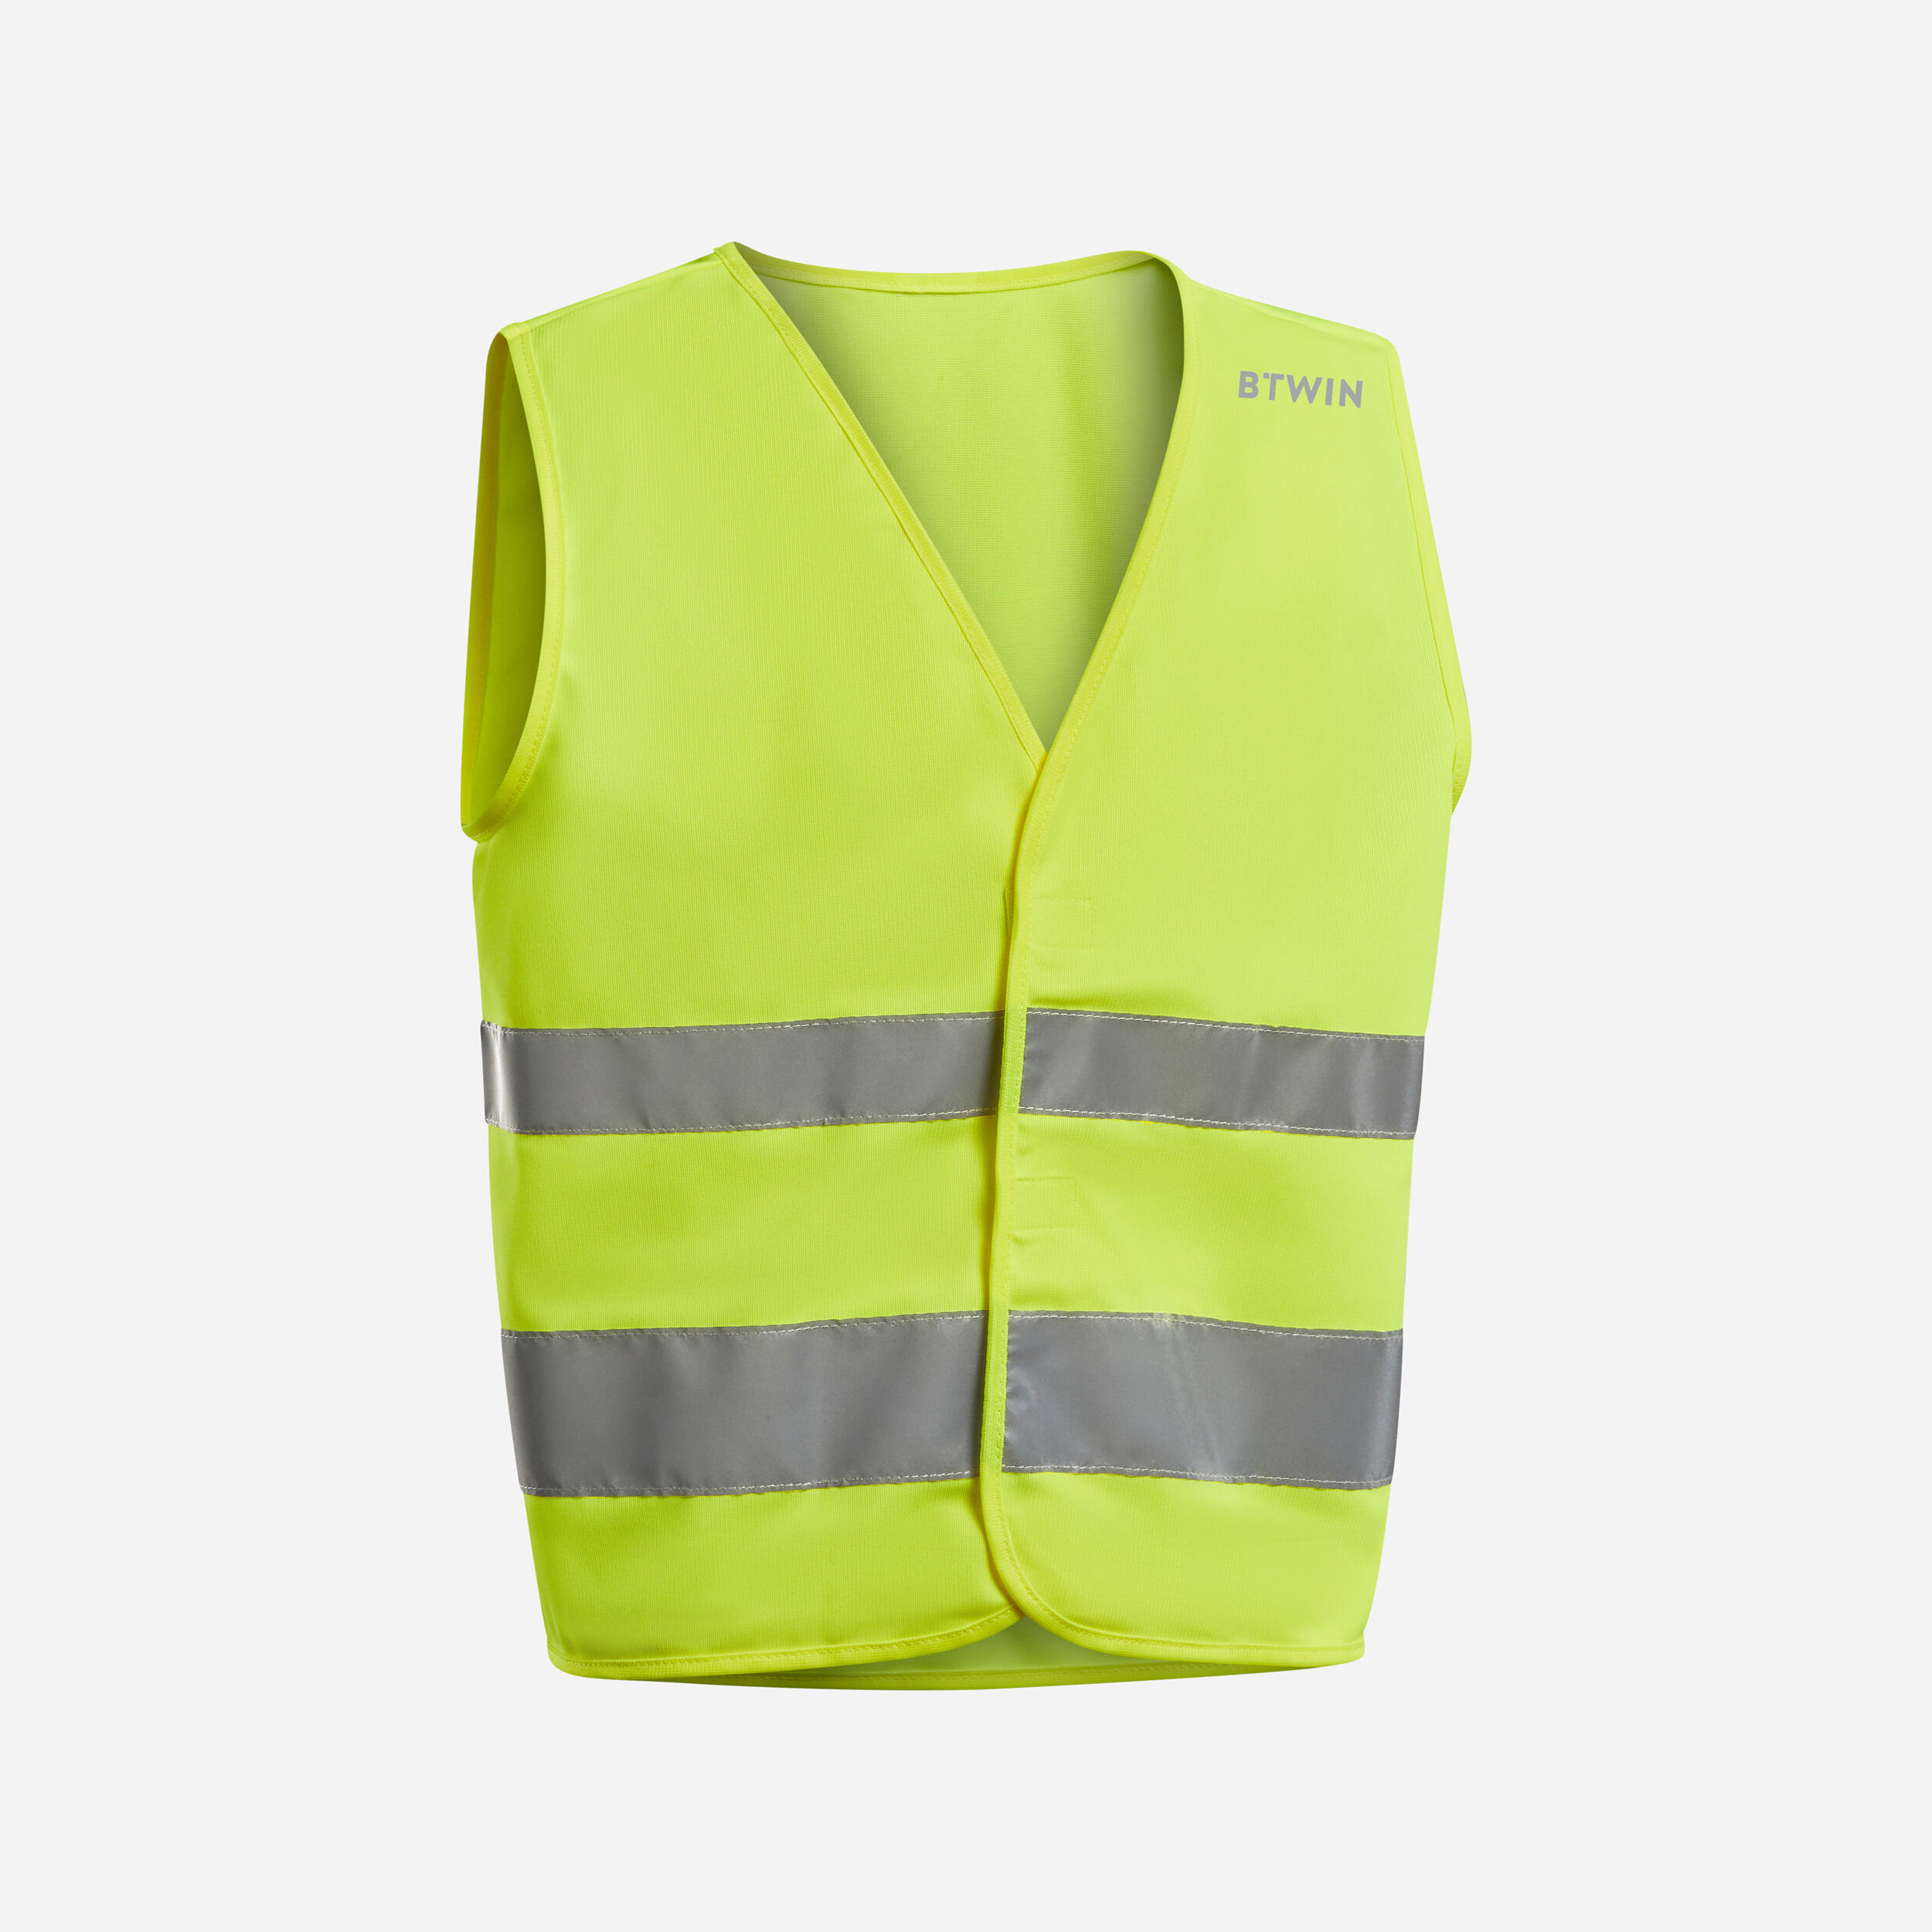 BTWIN Kids' Safety Vest - Yellow